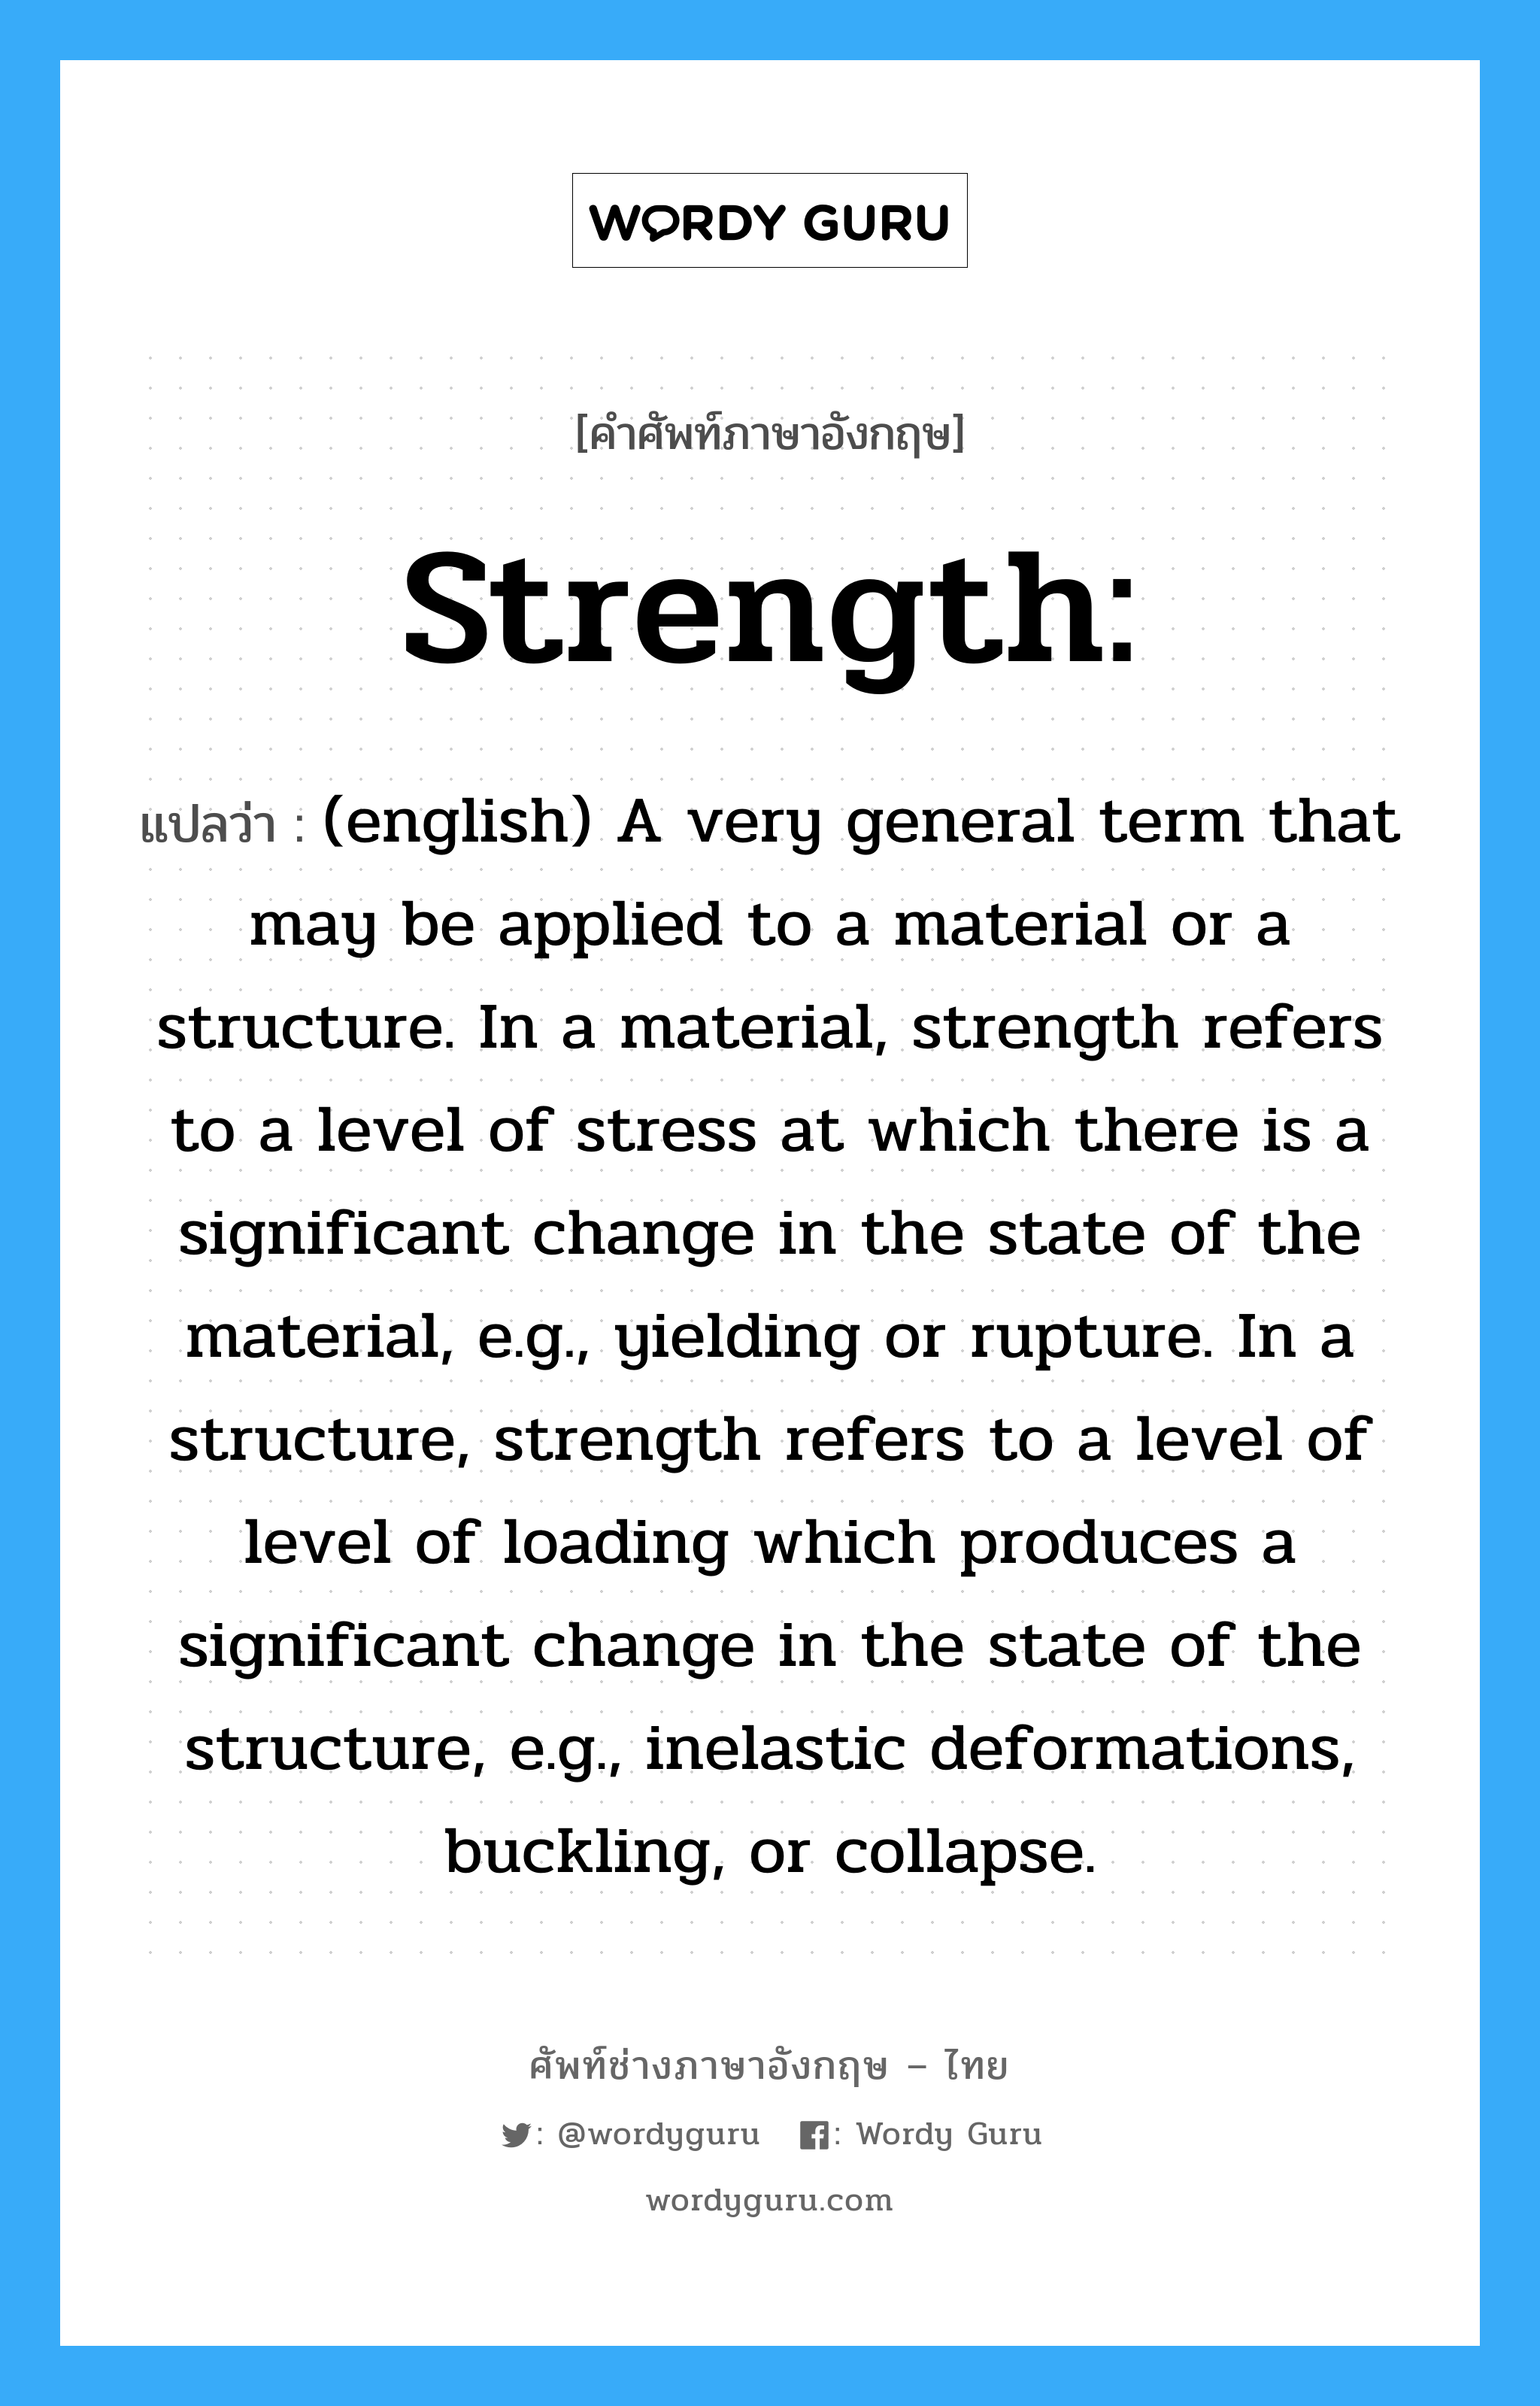 Strength: แปลว่า?, คำศัพท์ช่างภาษาอังกฤษ - ไทย Strength: คำศัพท์ภาษาอังกฤษ Strength: แปลว่า (english) A very general term that may be applied to a material or a structure. In a material, strength refers to a level of stress at which there is a significant change in the state of the material, e.g., yielding or rupture. In a structure, strength refers to a level of level of loading which produces a significant change in the state of the structure, e.g., inelastic deformations, buckling, or collapse.